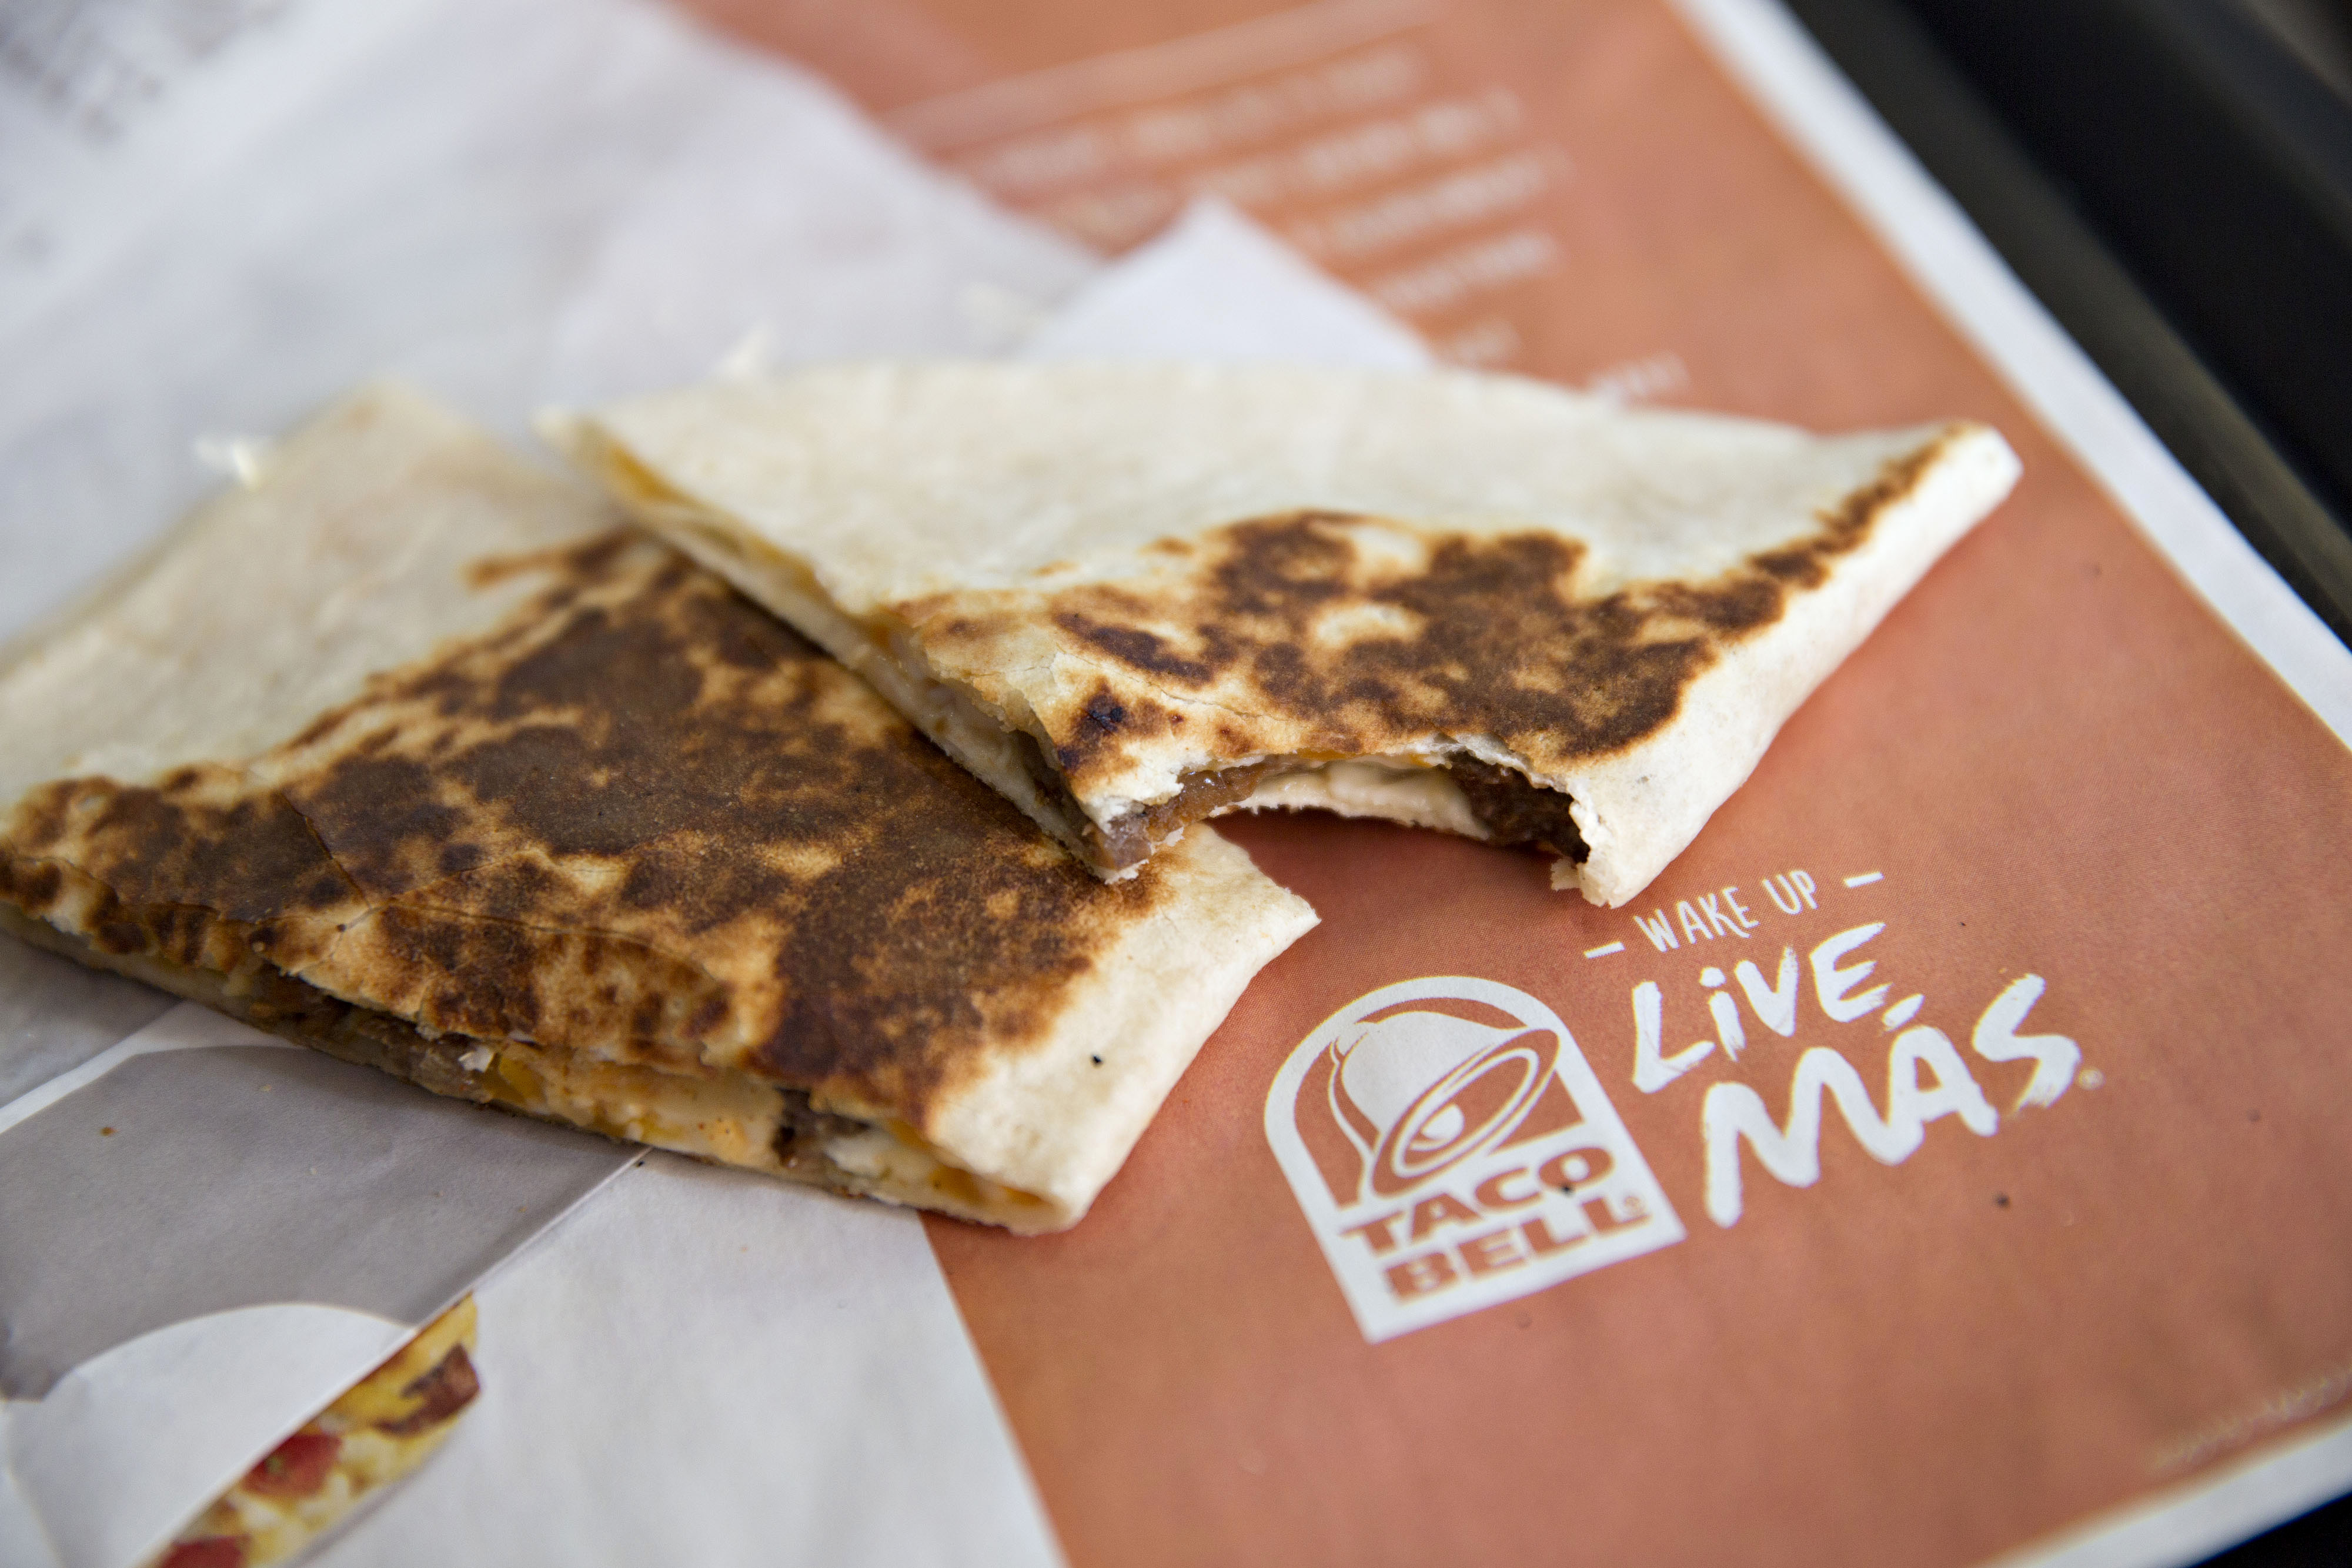 Food is arranged for a photograph at a Taco Bell restaurant in Peru, Illinois, U.S., on Thursday, Oct. 1, 2015. Yum! Brands Inc., owner of restaurant brands KFC, Pizza Hut, and Taco Bell, is scheduled to release third-quarter earnings on October 6. (Daniel Acker—Bloomberg/Getty Images)